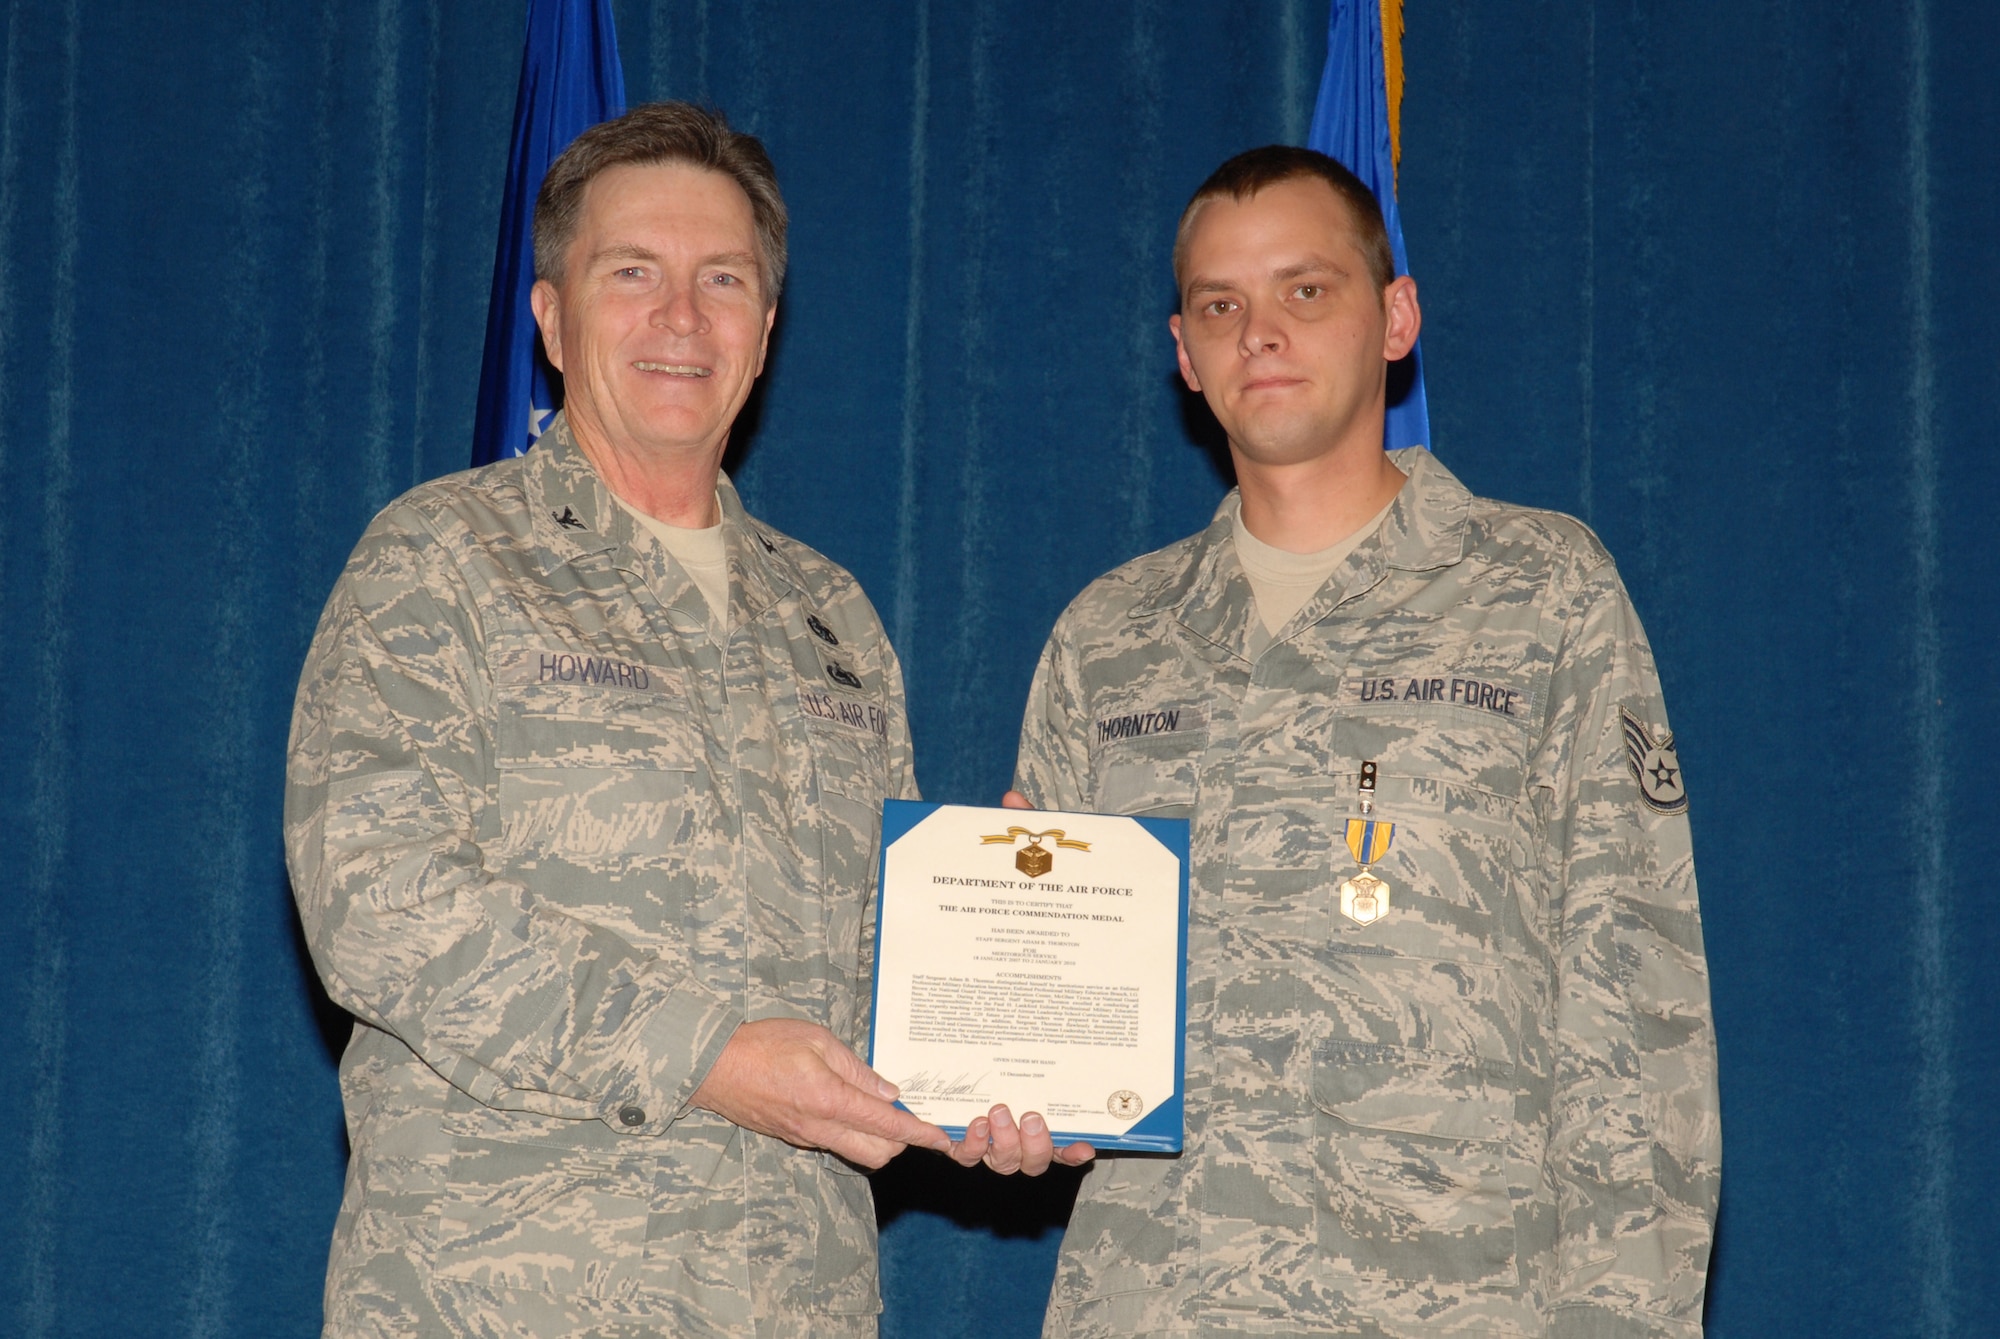 McGHEE TYSON AIR NATIONAL GUARD BASE, Tenn. -- Col. Richard B. Howard, left, commander, presents the Air Force Commendation medal to Staff Sgt. Adam B. Thornton, an enlisted professional military education instructor, upon his departure from assignment at The I.G. Brown Air National Guard Training and Education Center here, Dec. 18, 2009. (U.S. Air Force photograph by Master Sgt. Mavi Smith/Released)